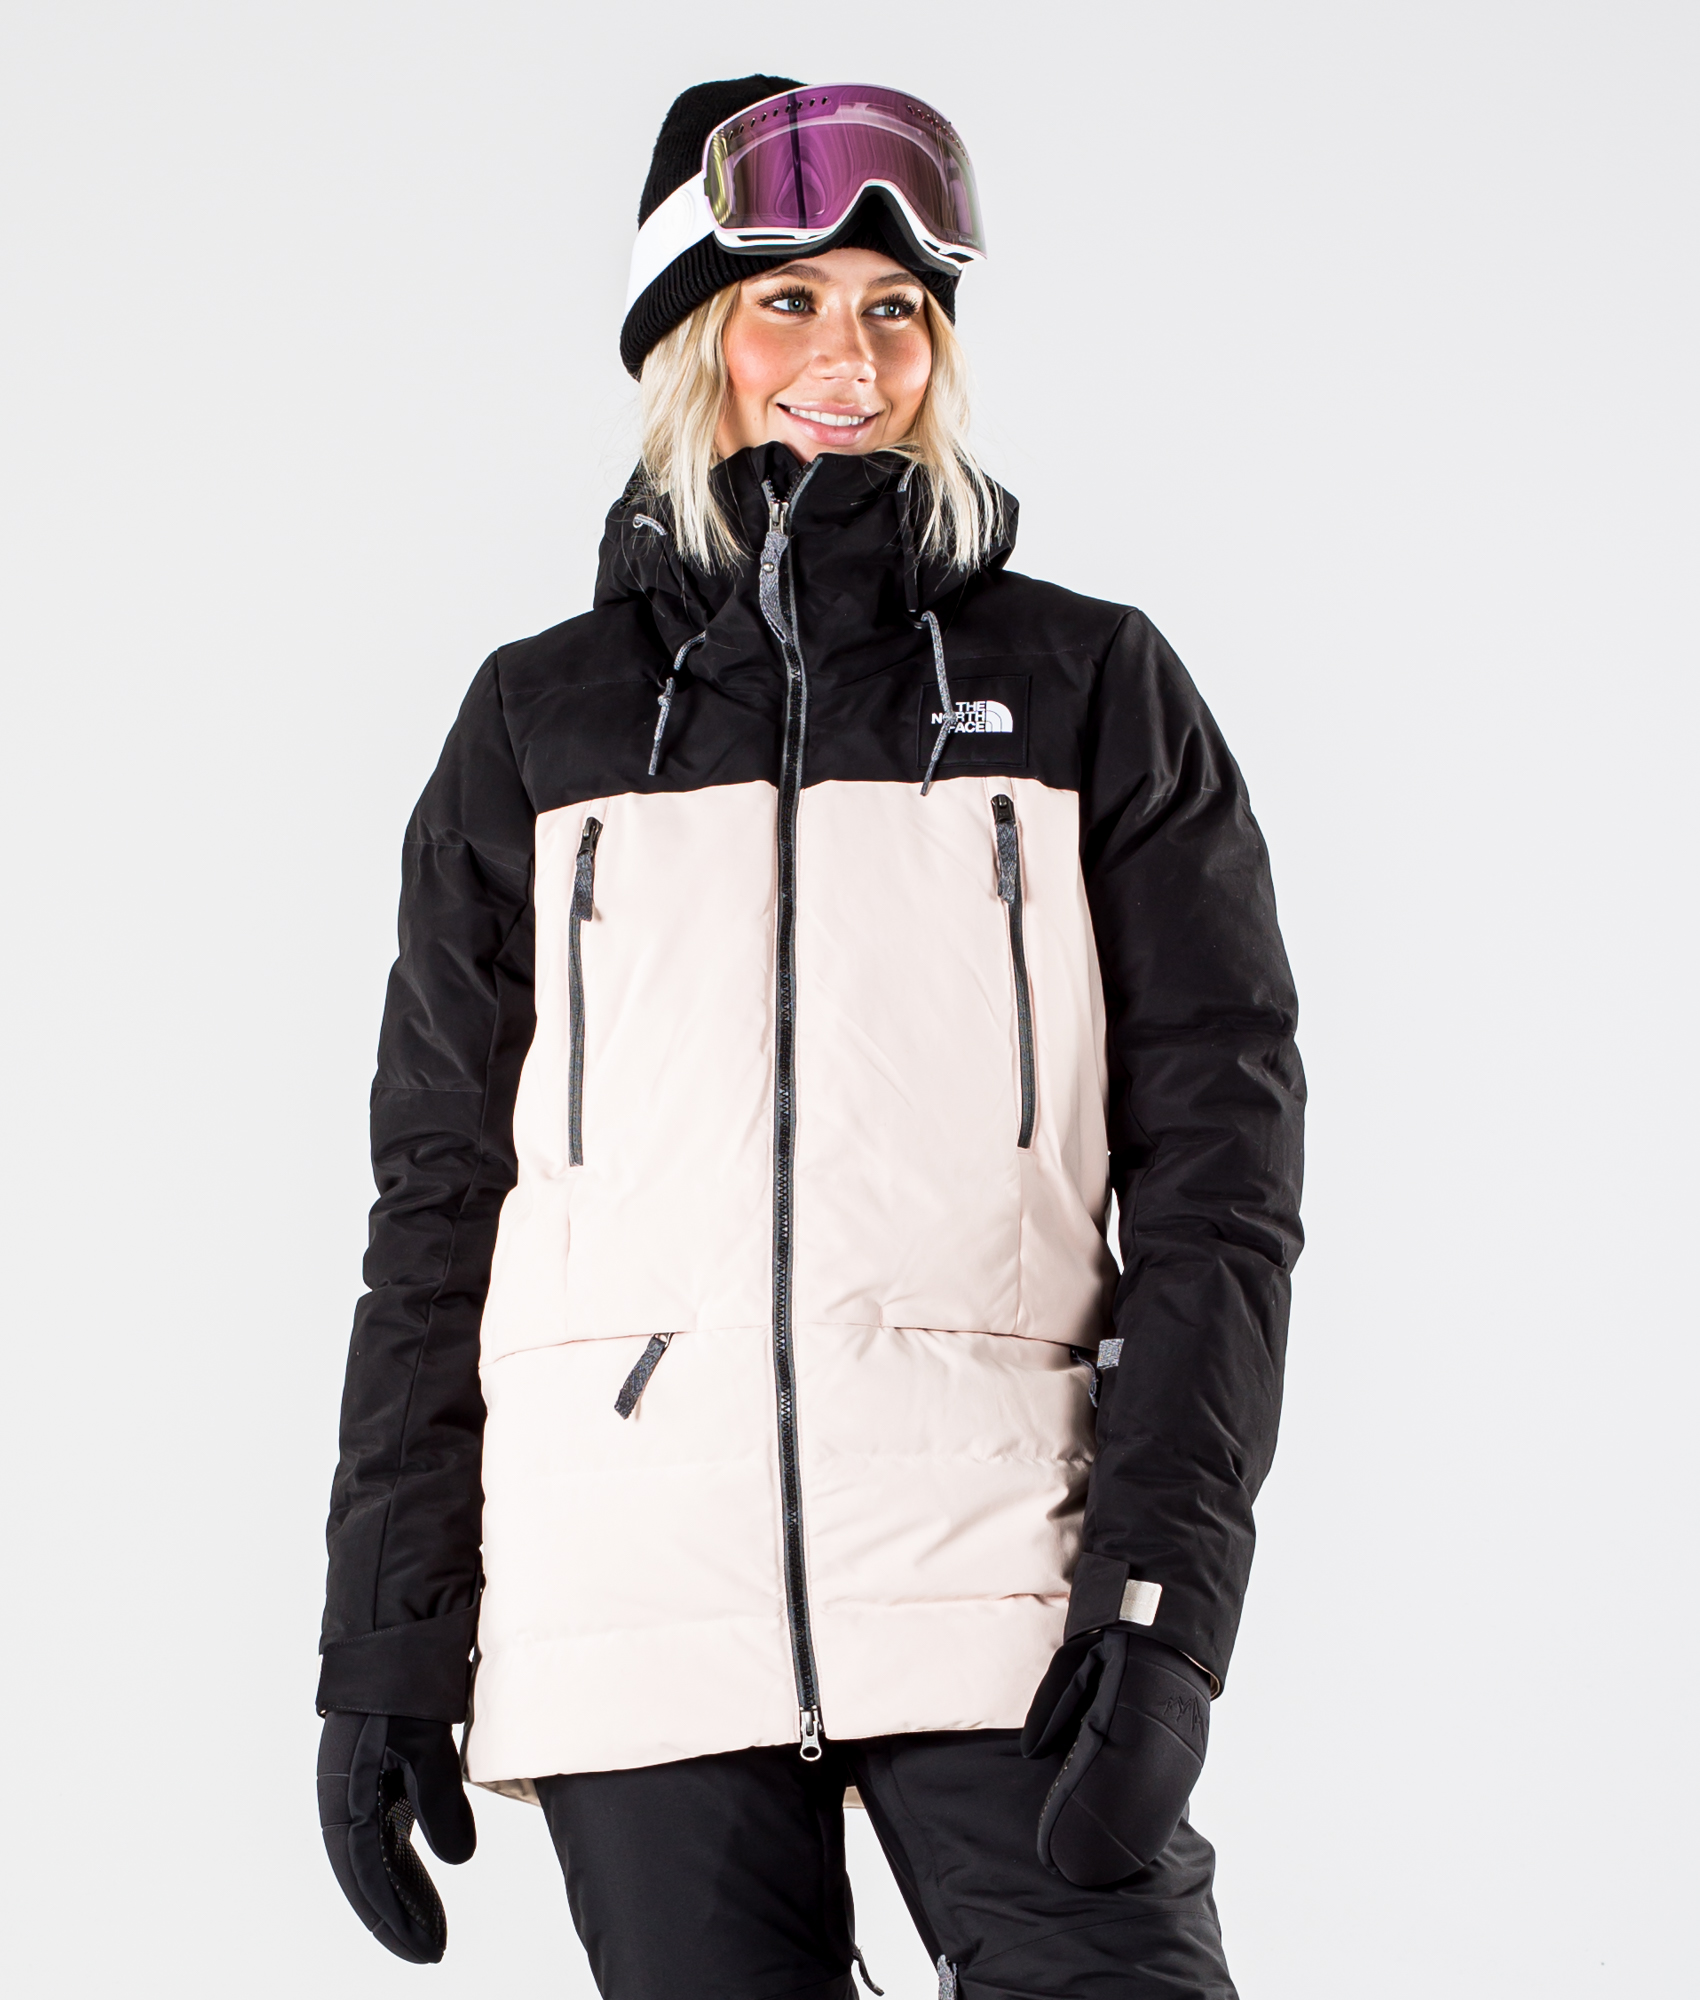 snowboard jacket the north face